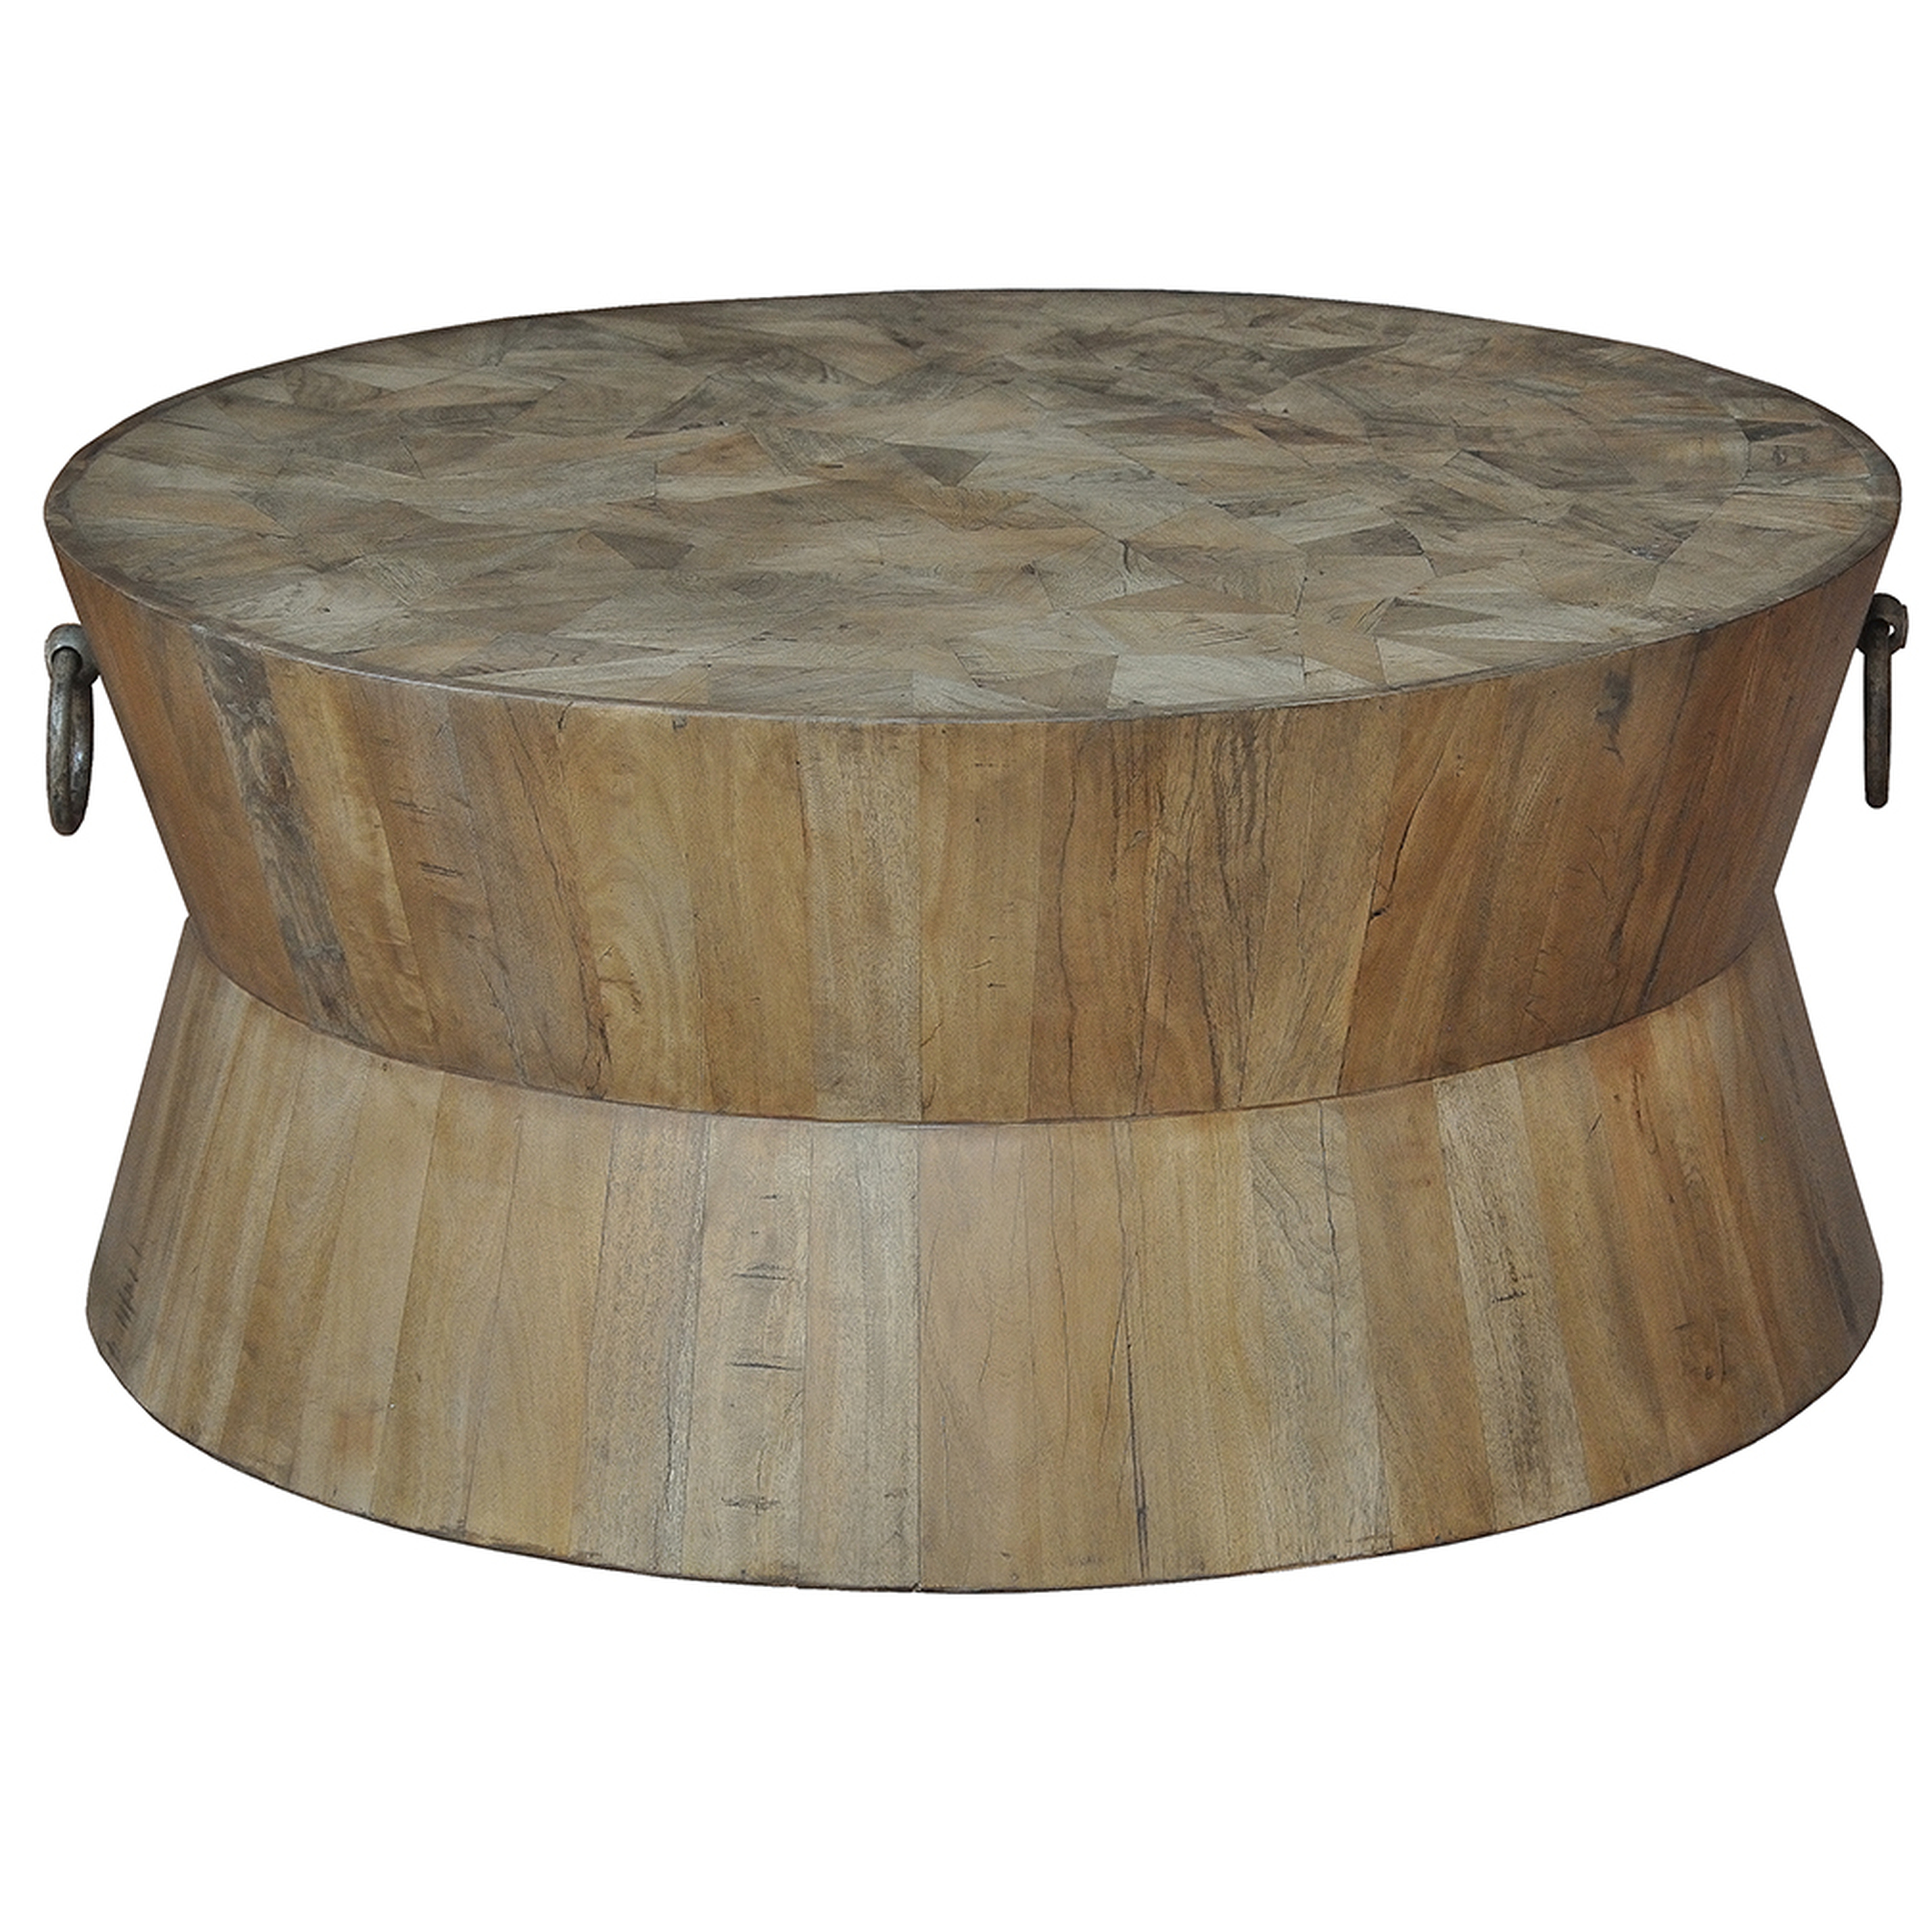 Thea Rustic Lodge Round Wood Coffee Table - Kathy Kuo Home